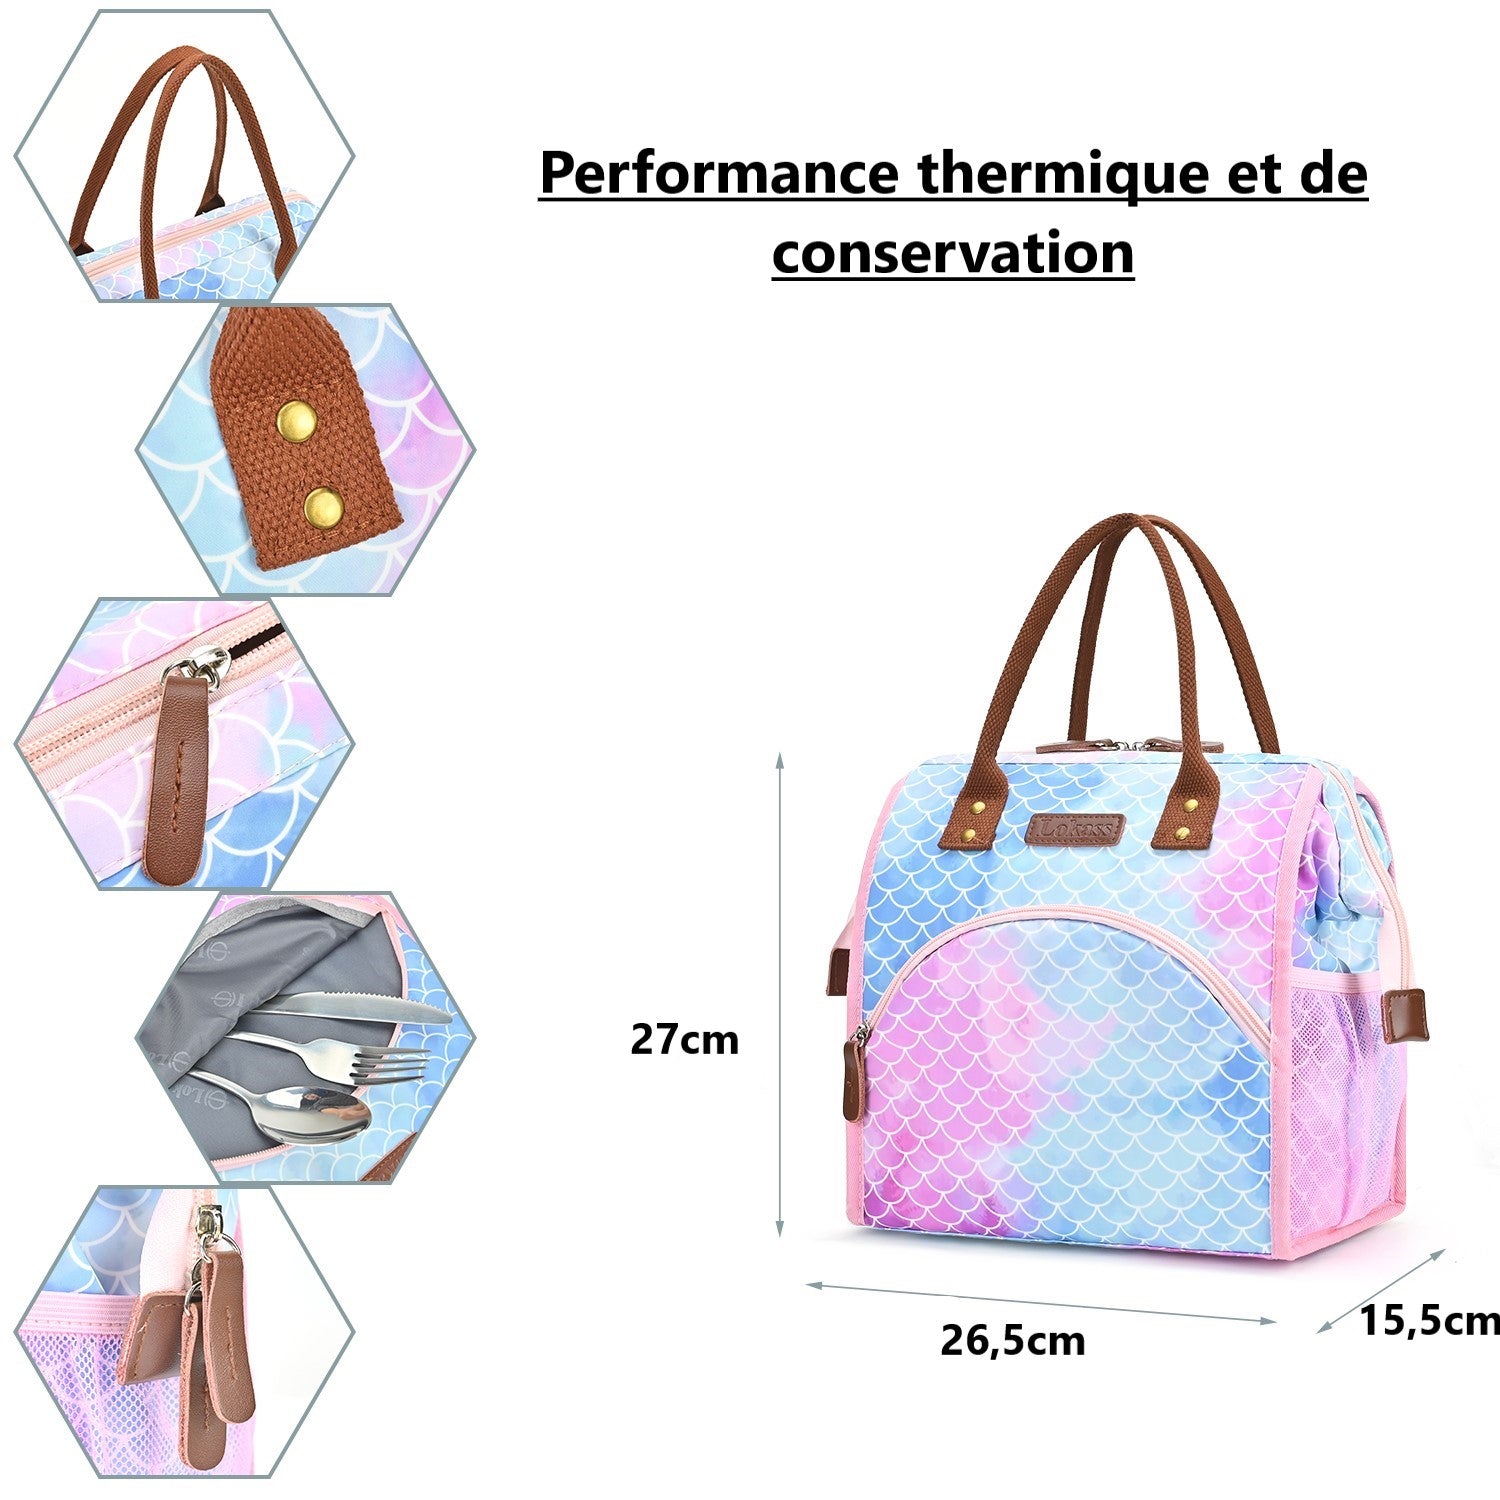 sac isotherme femme chic dimensions